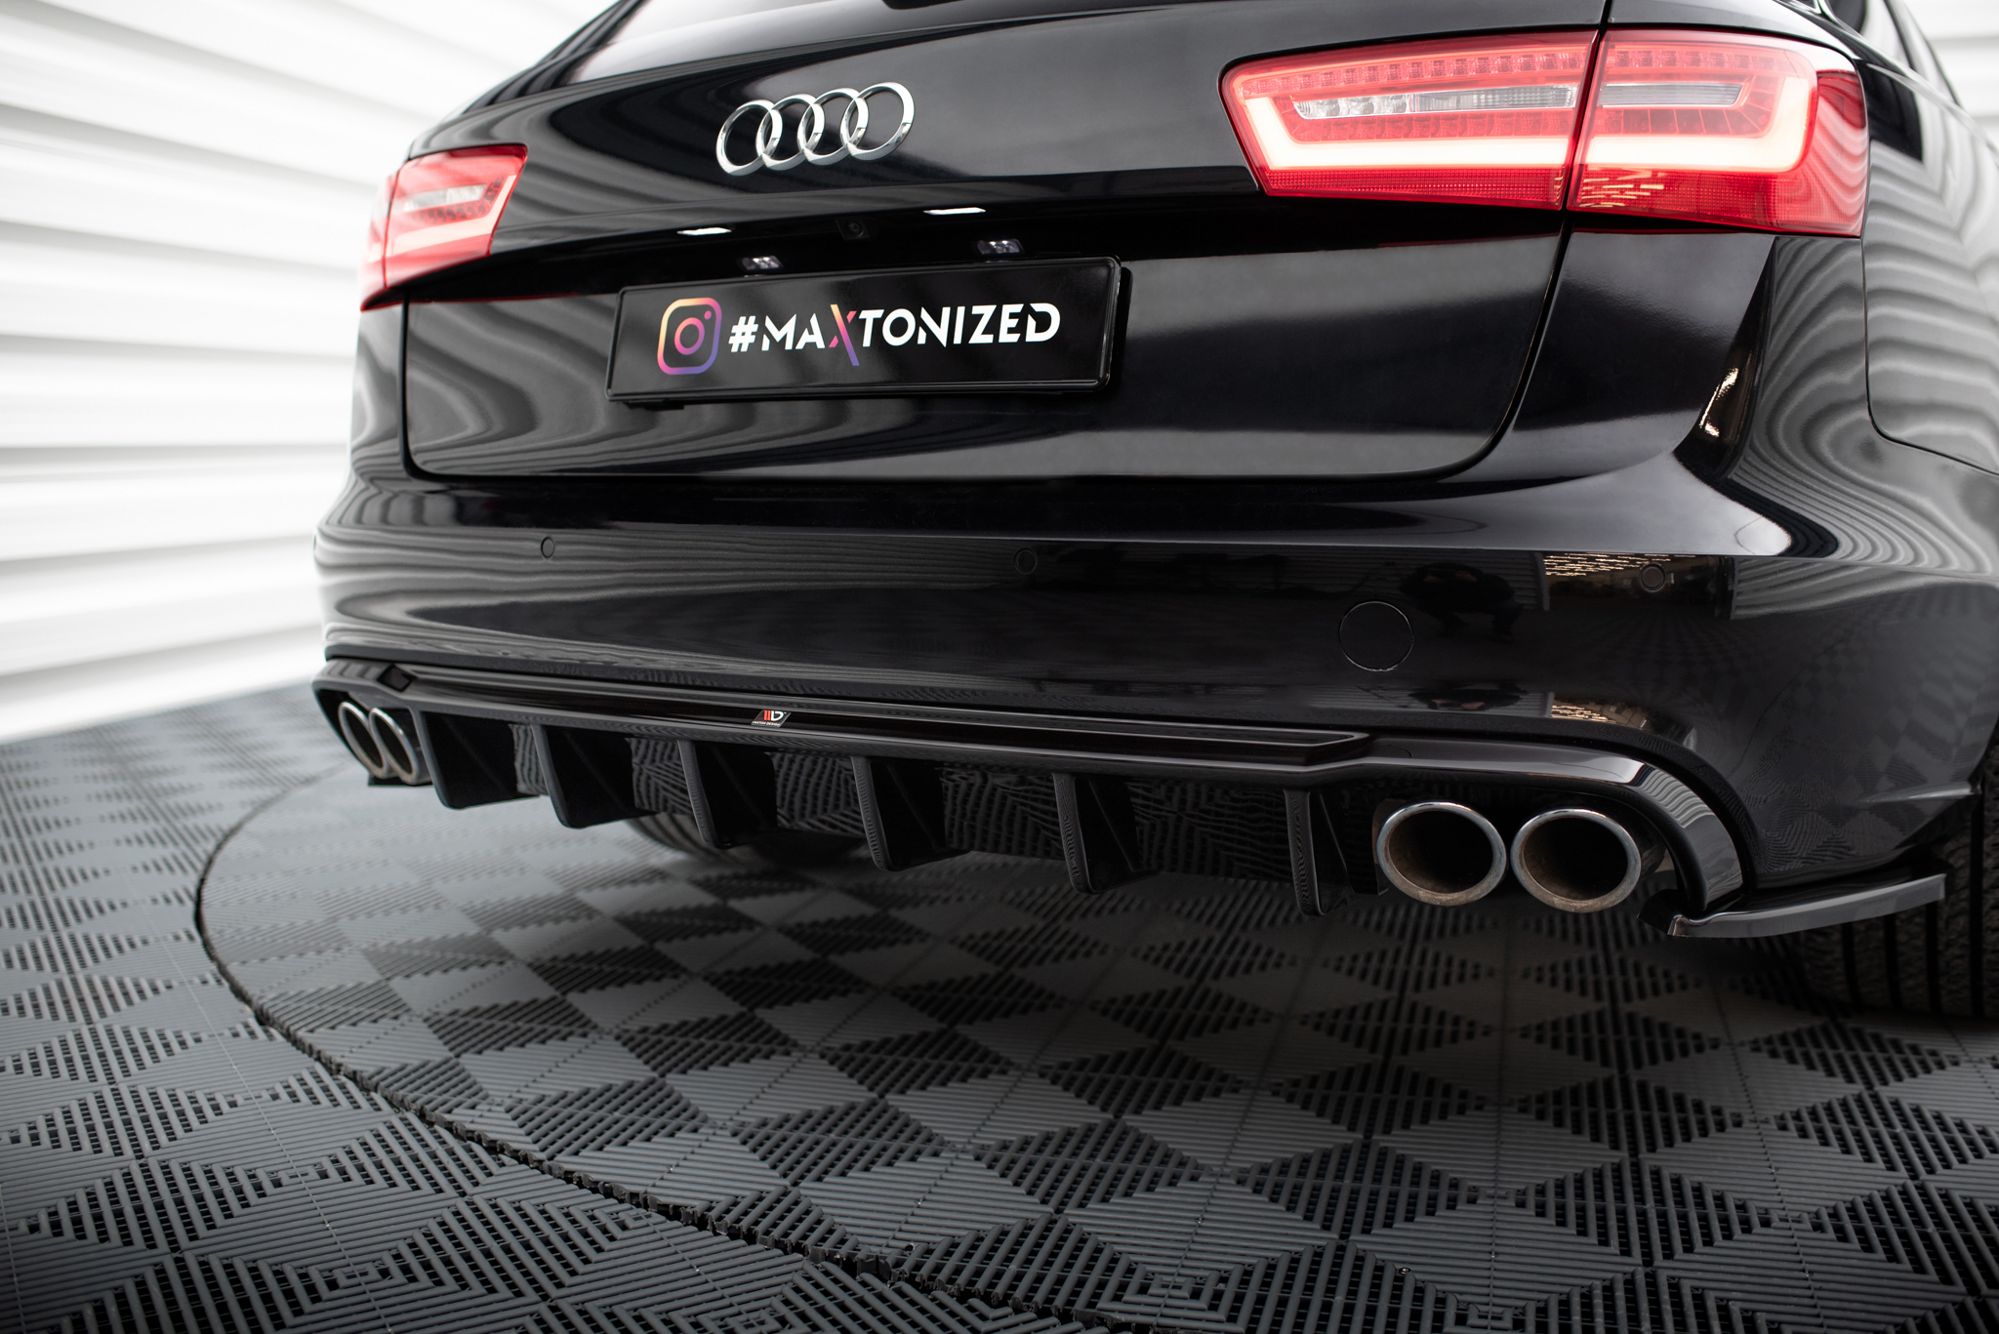 Rear Valance Audi A6 Avant C7 (Version with dual exhausts on both sides)